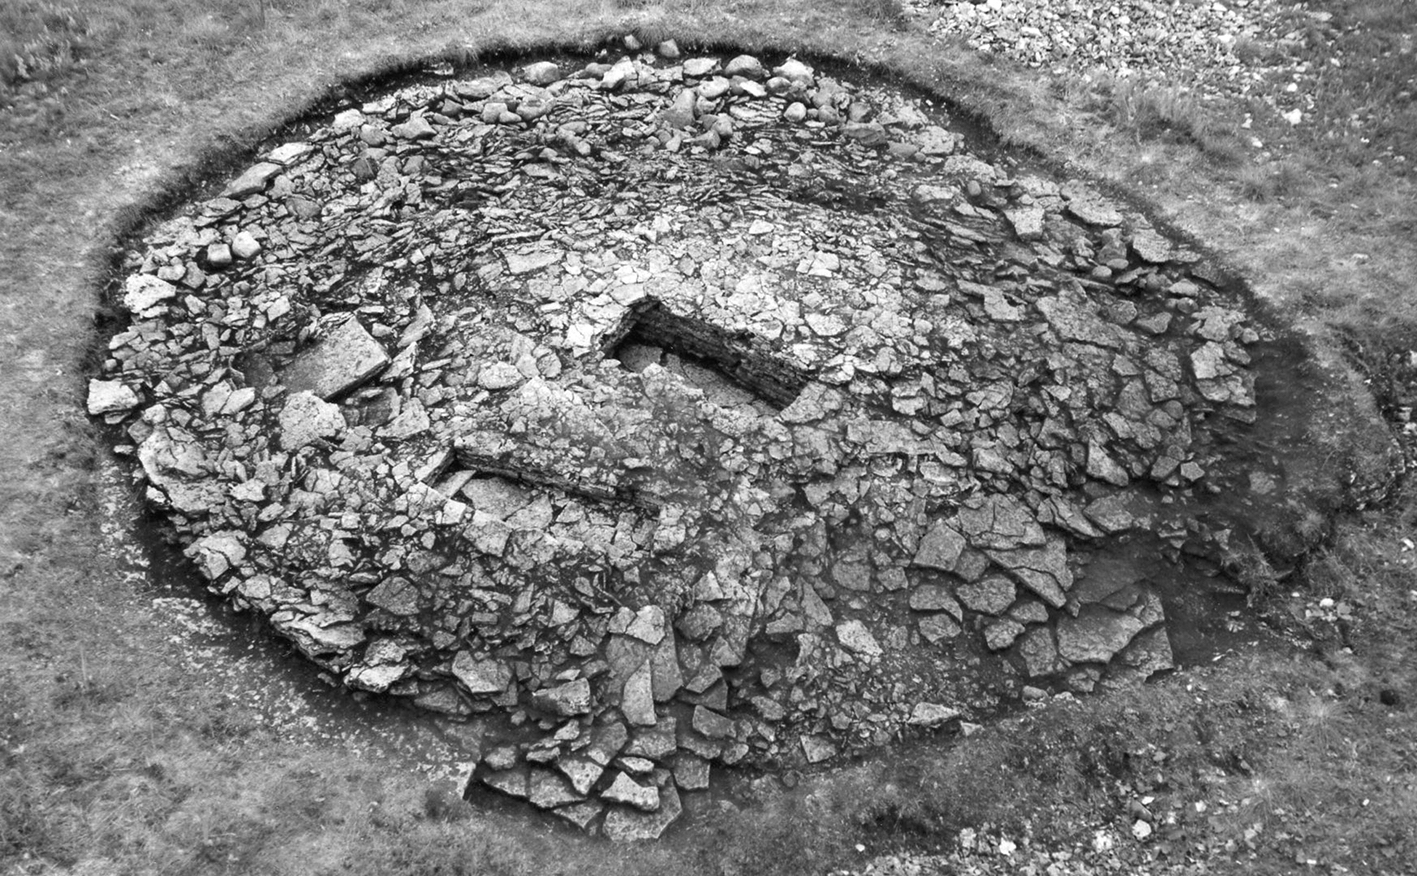 Stone cist grave - in the centre, a coffin the size of a man, surrounded by a circular limestone cairn. 